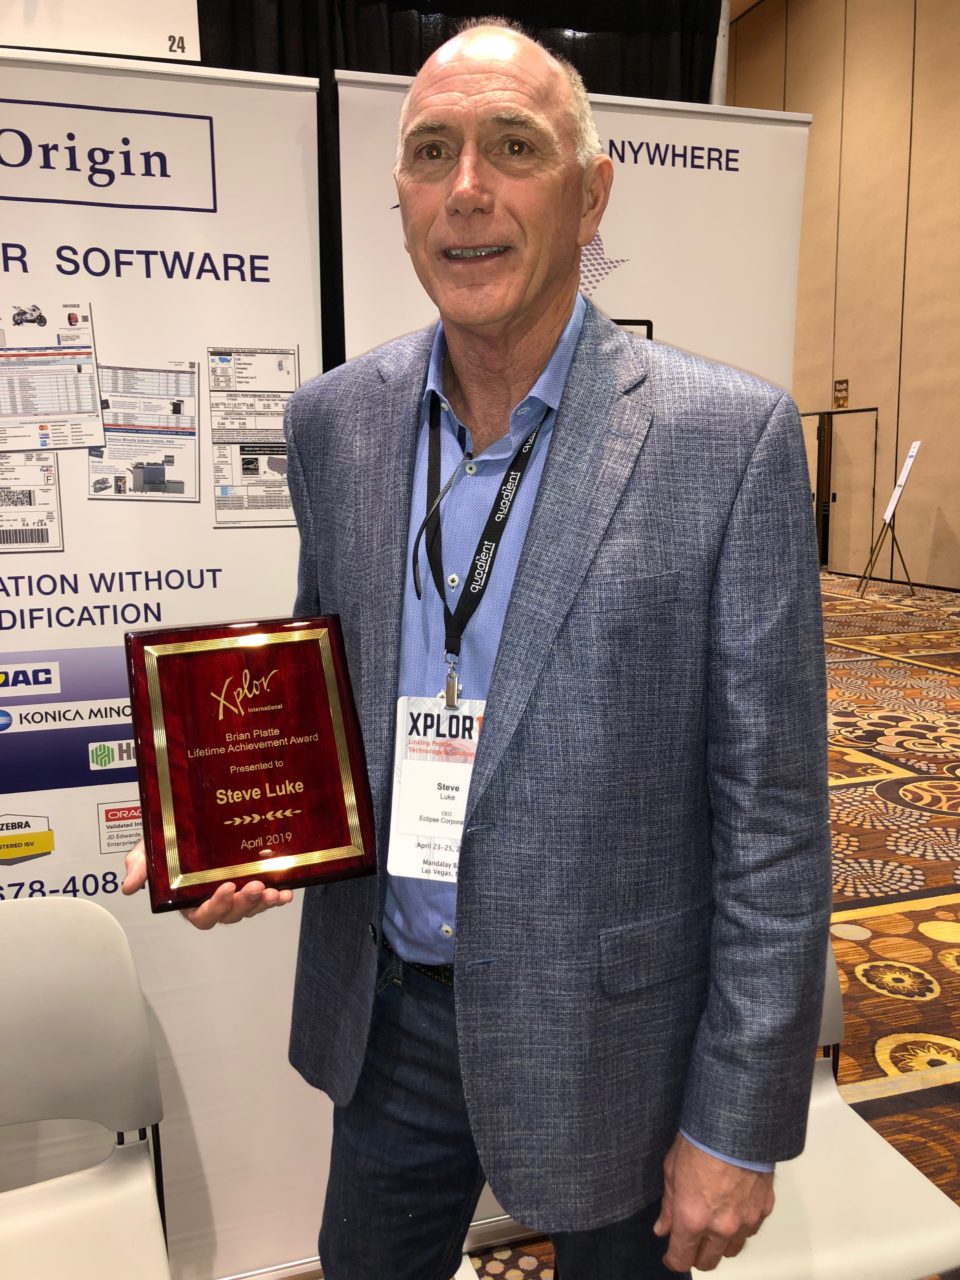 Steve Luke, Founder and CEO of Eclipse Corp displays the Brain Platte Lifetime Achievement Award he received at Xplor 19